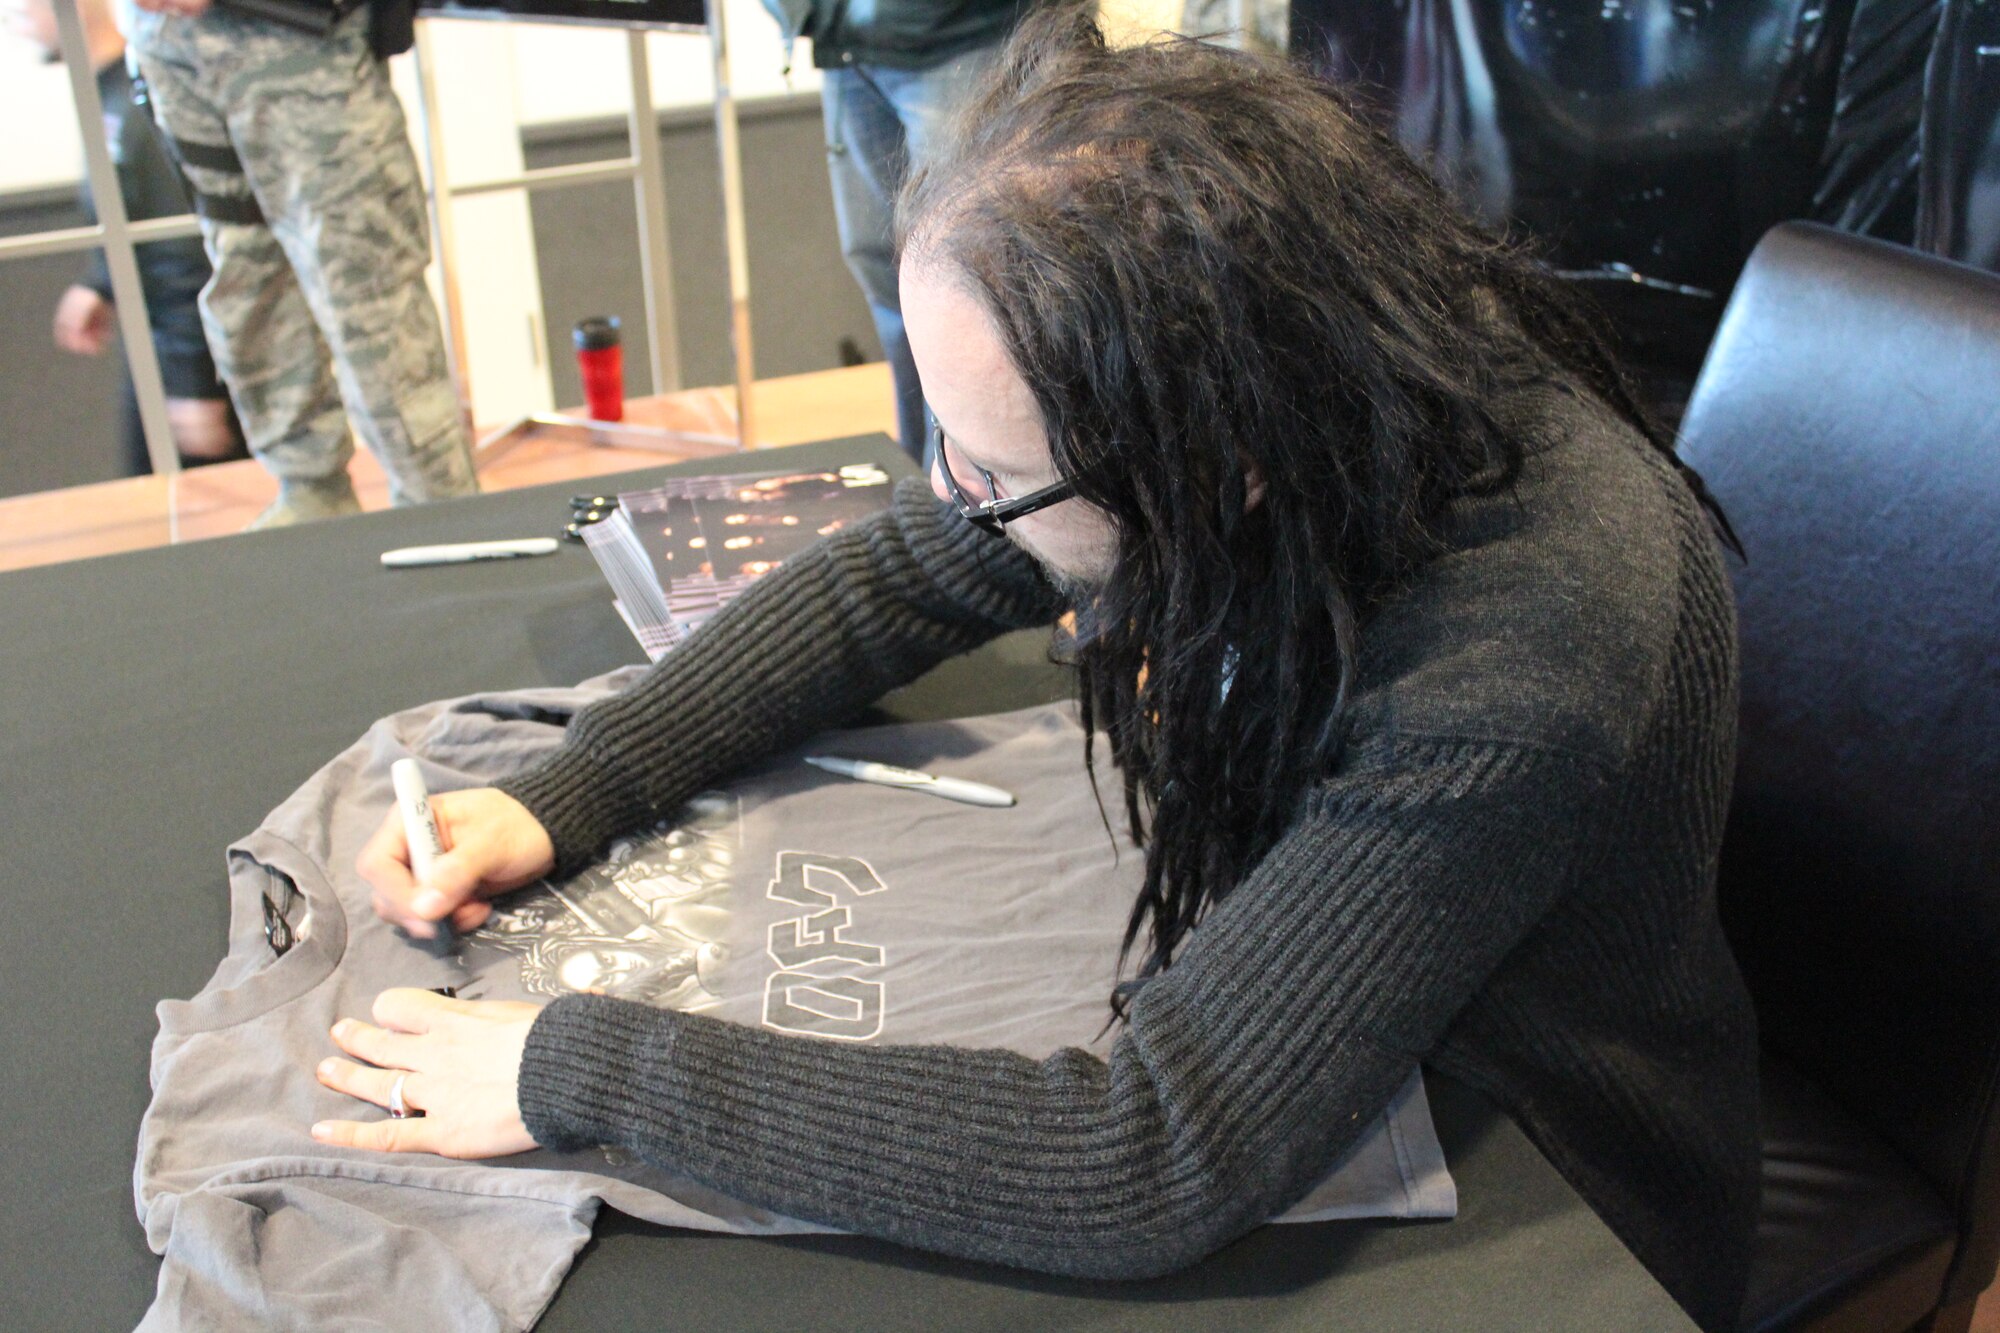 Jonathan Davis, lead singer of the band KoRn, signs a t-shirt for a fan at the Kaiserslautern Military Community Center, 16 March 2012, Ramstein Air Base, Germany. Davis toured the base to visit various units and sign autographs for his fans. (U.S. Air Force Photo/ Airman 1st Class Ellen McCarthy)